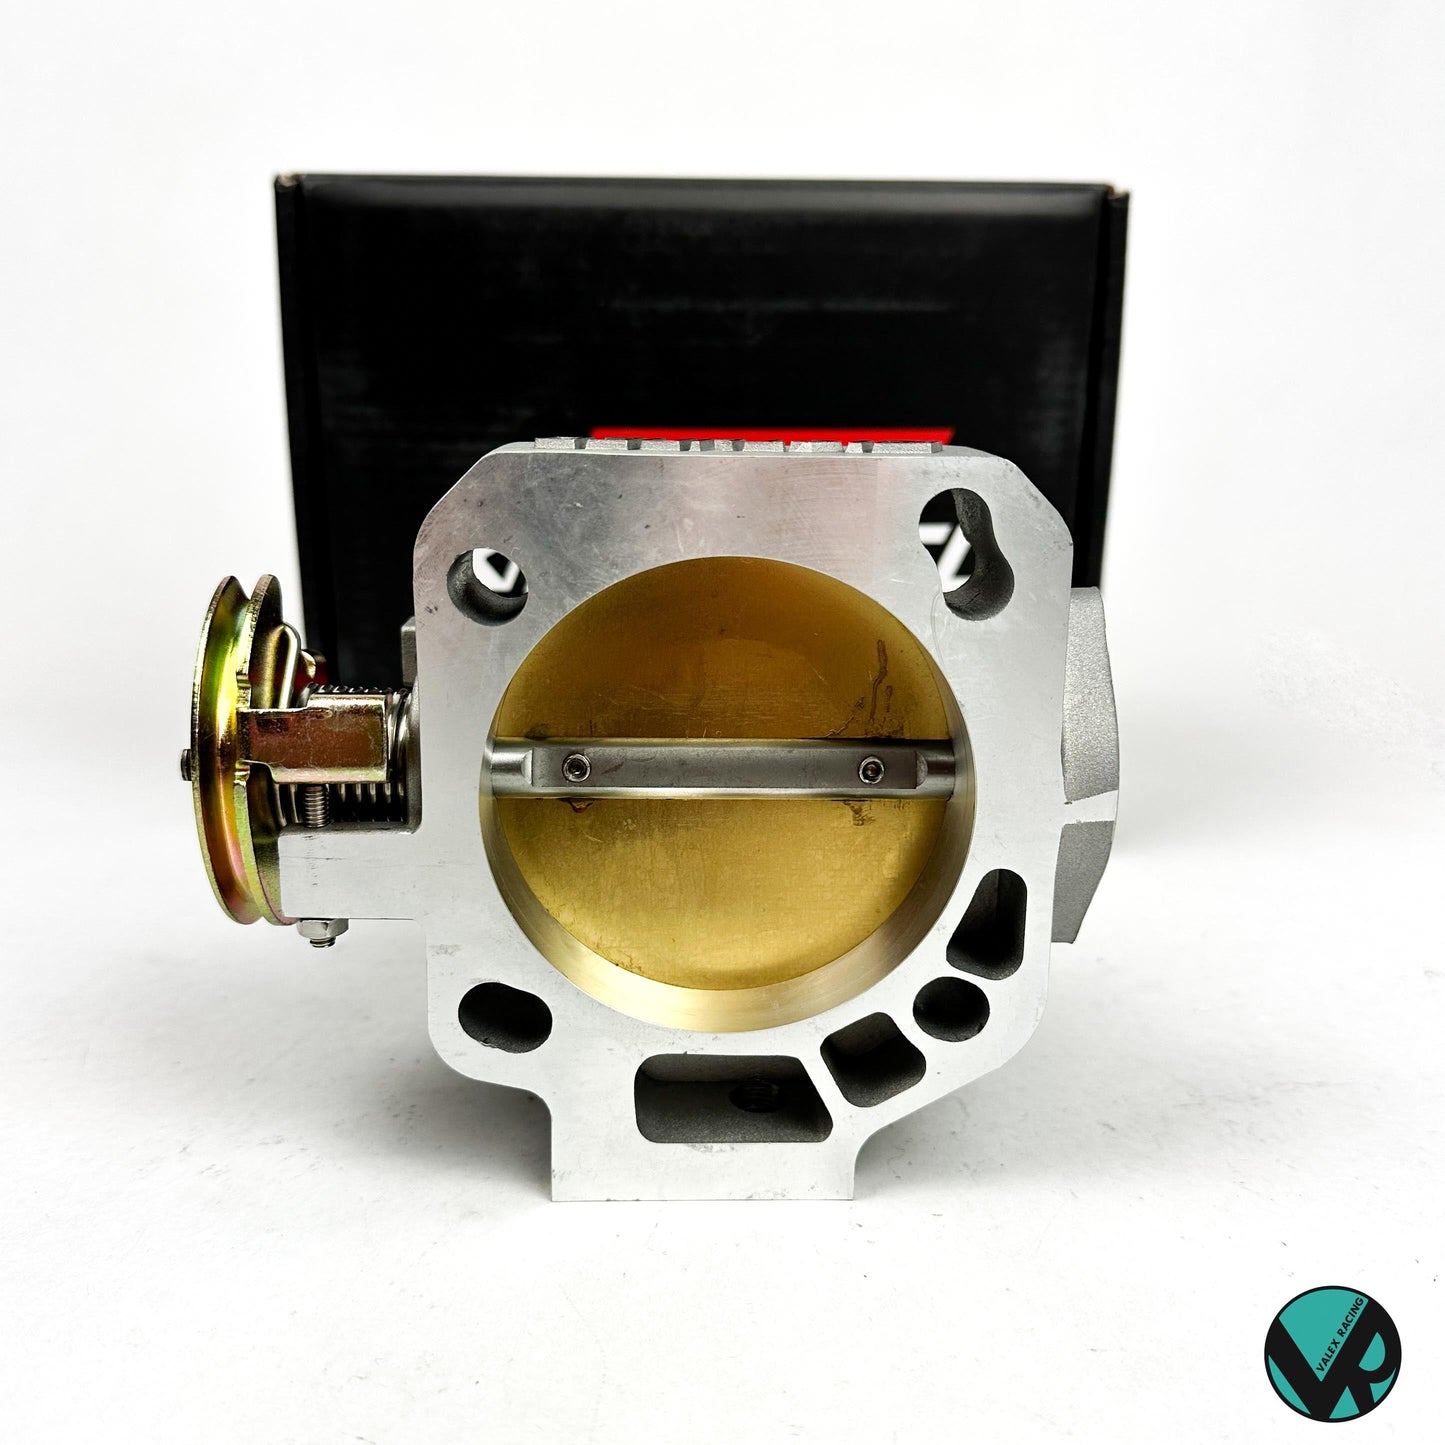 K-Tuned 72mm Cast Throttle Body Dual With Thermal Gasket For RBC / PRB Intake Manifold